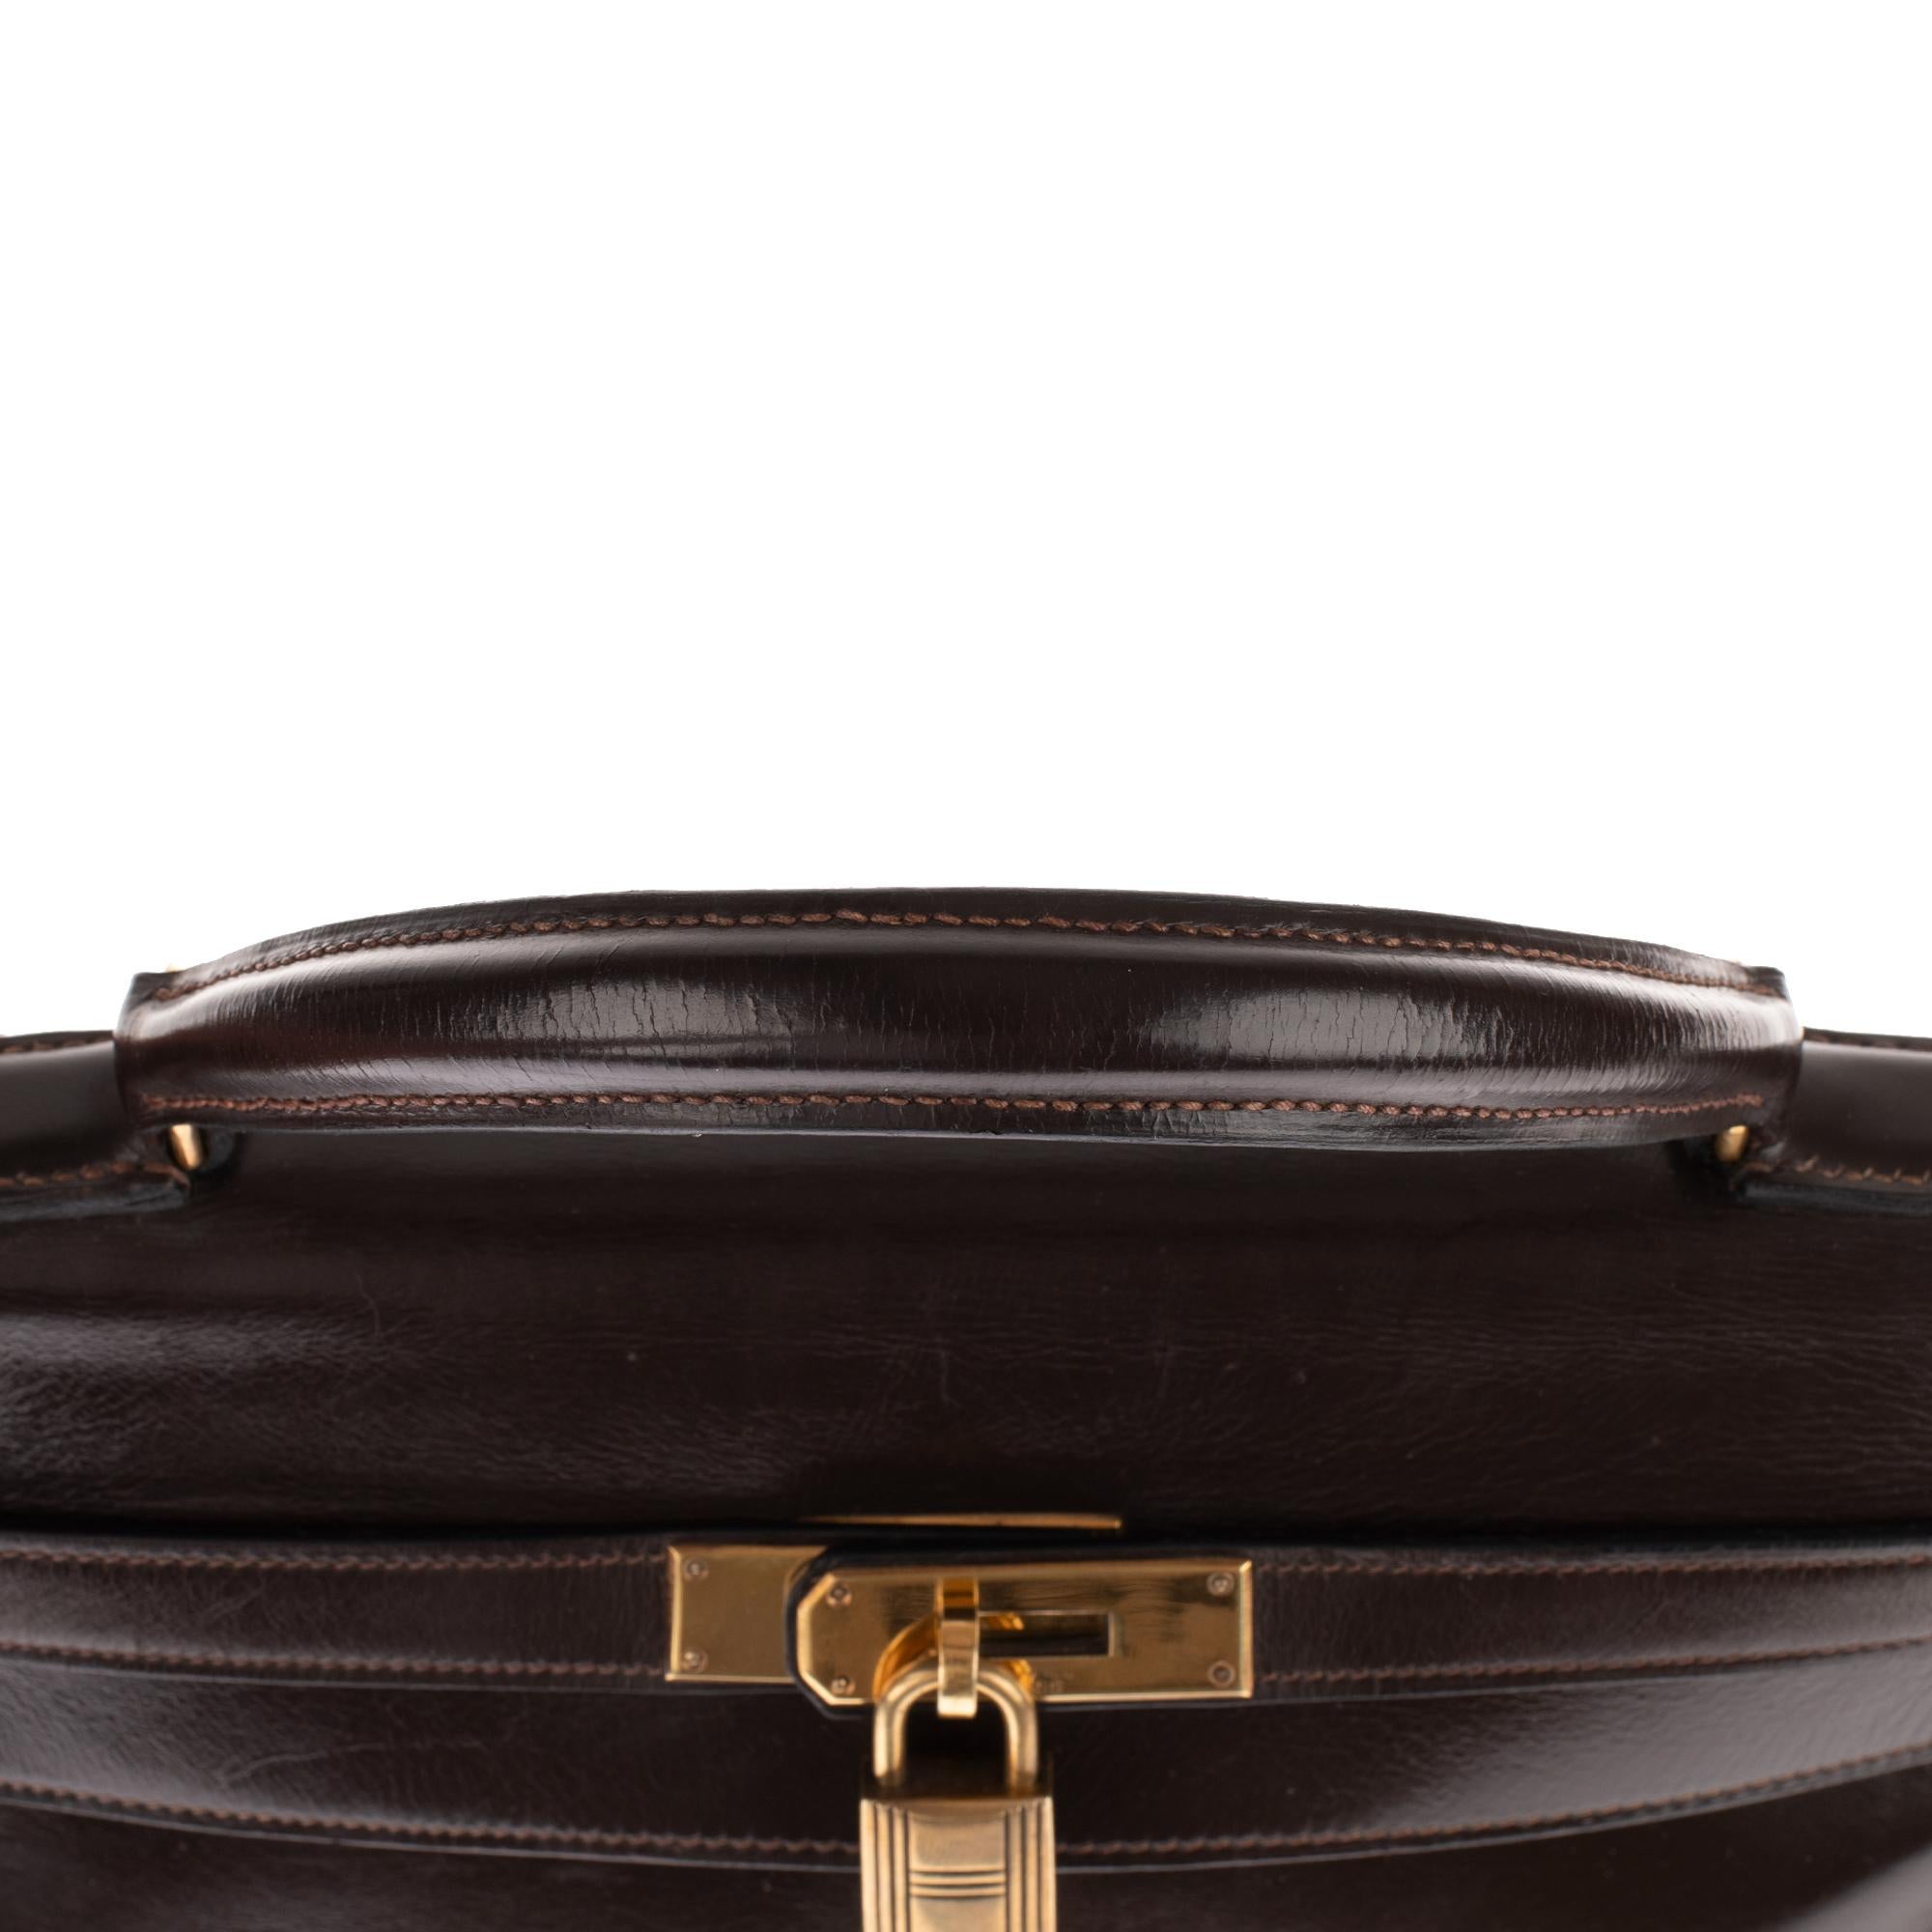 Hermès Kelly 32 handbag in brown calfskin leather with strap and golden hardware 4